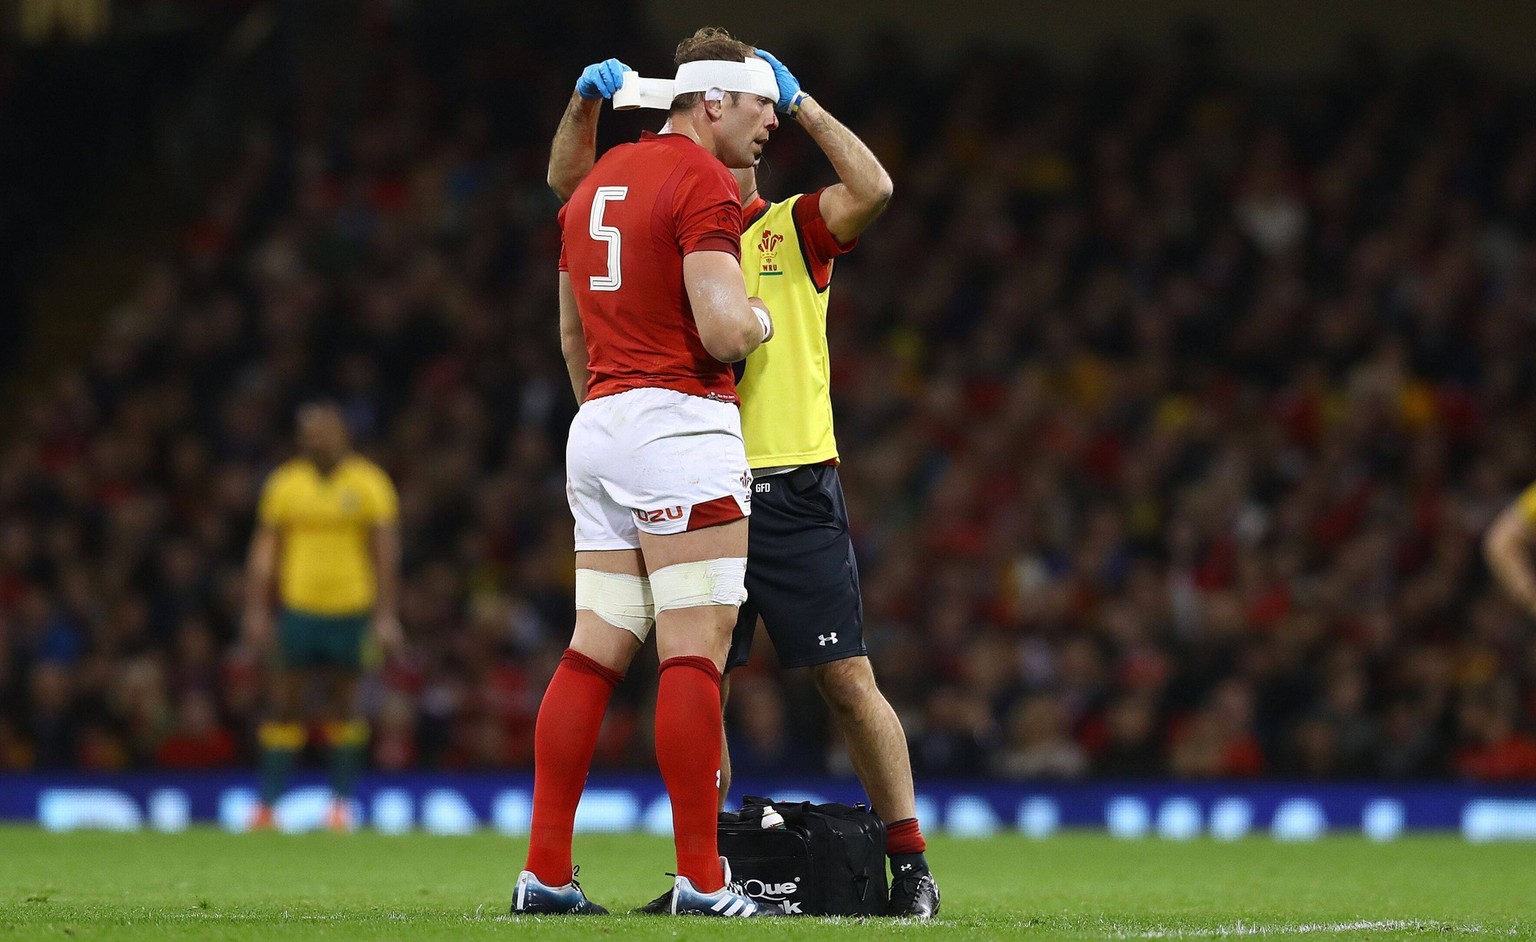 Mandatory Credit: Photo by Kieran McManus/BPI/Shutterstock 9973169i Alun Wyn Jones of Wales gets patched up by a medic after suffering a head injury Wales v Australia, Under Armour Series, Rugby Union ...